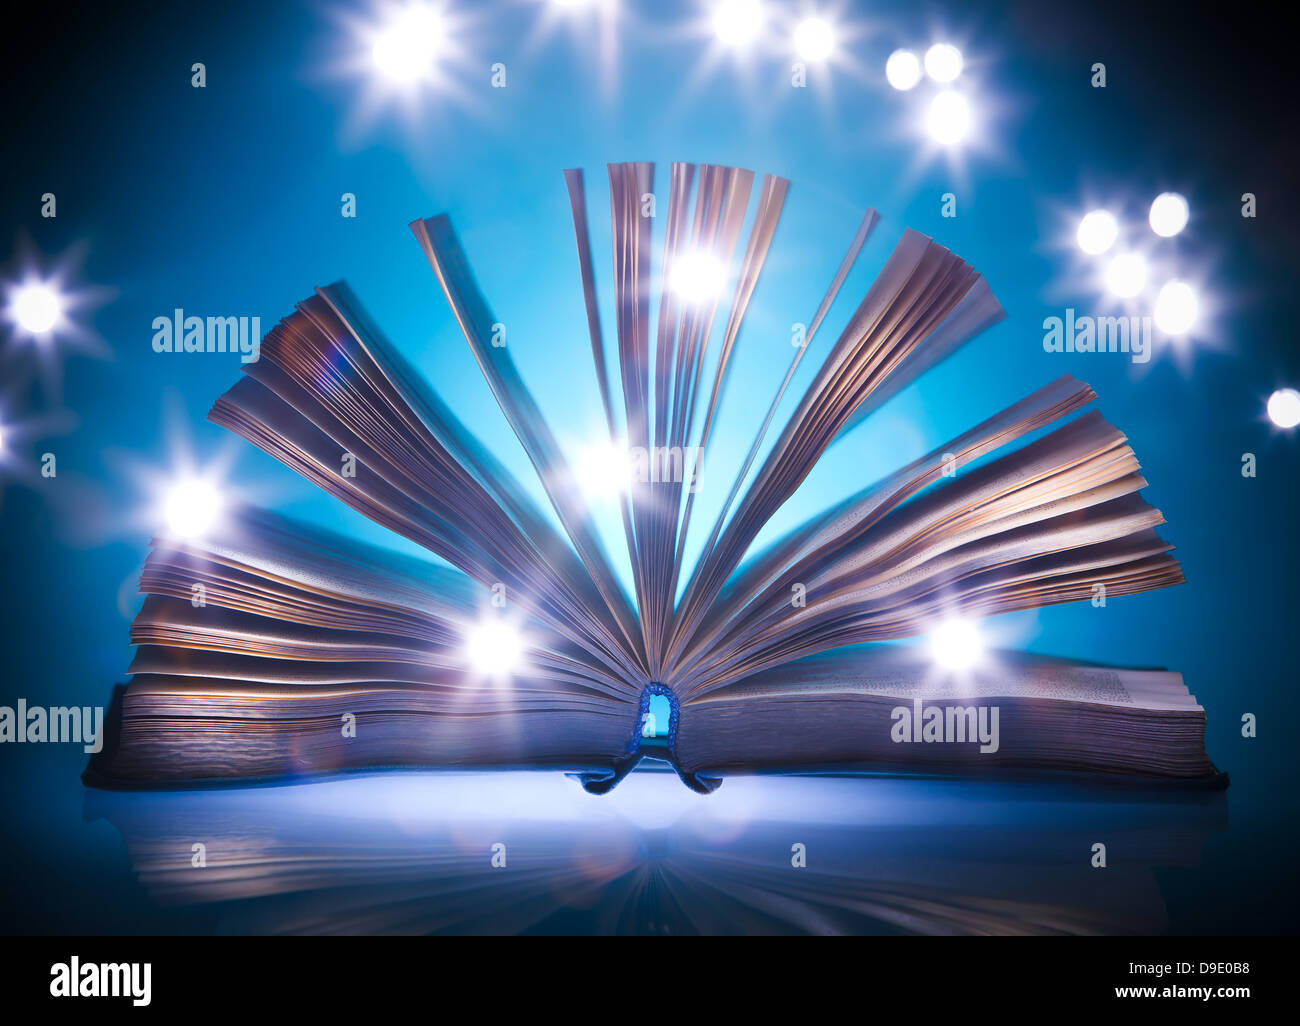 Open old book, mystical blue light at background, light painting Stock Photo